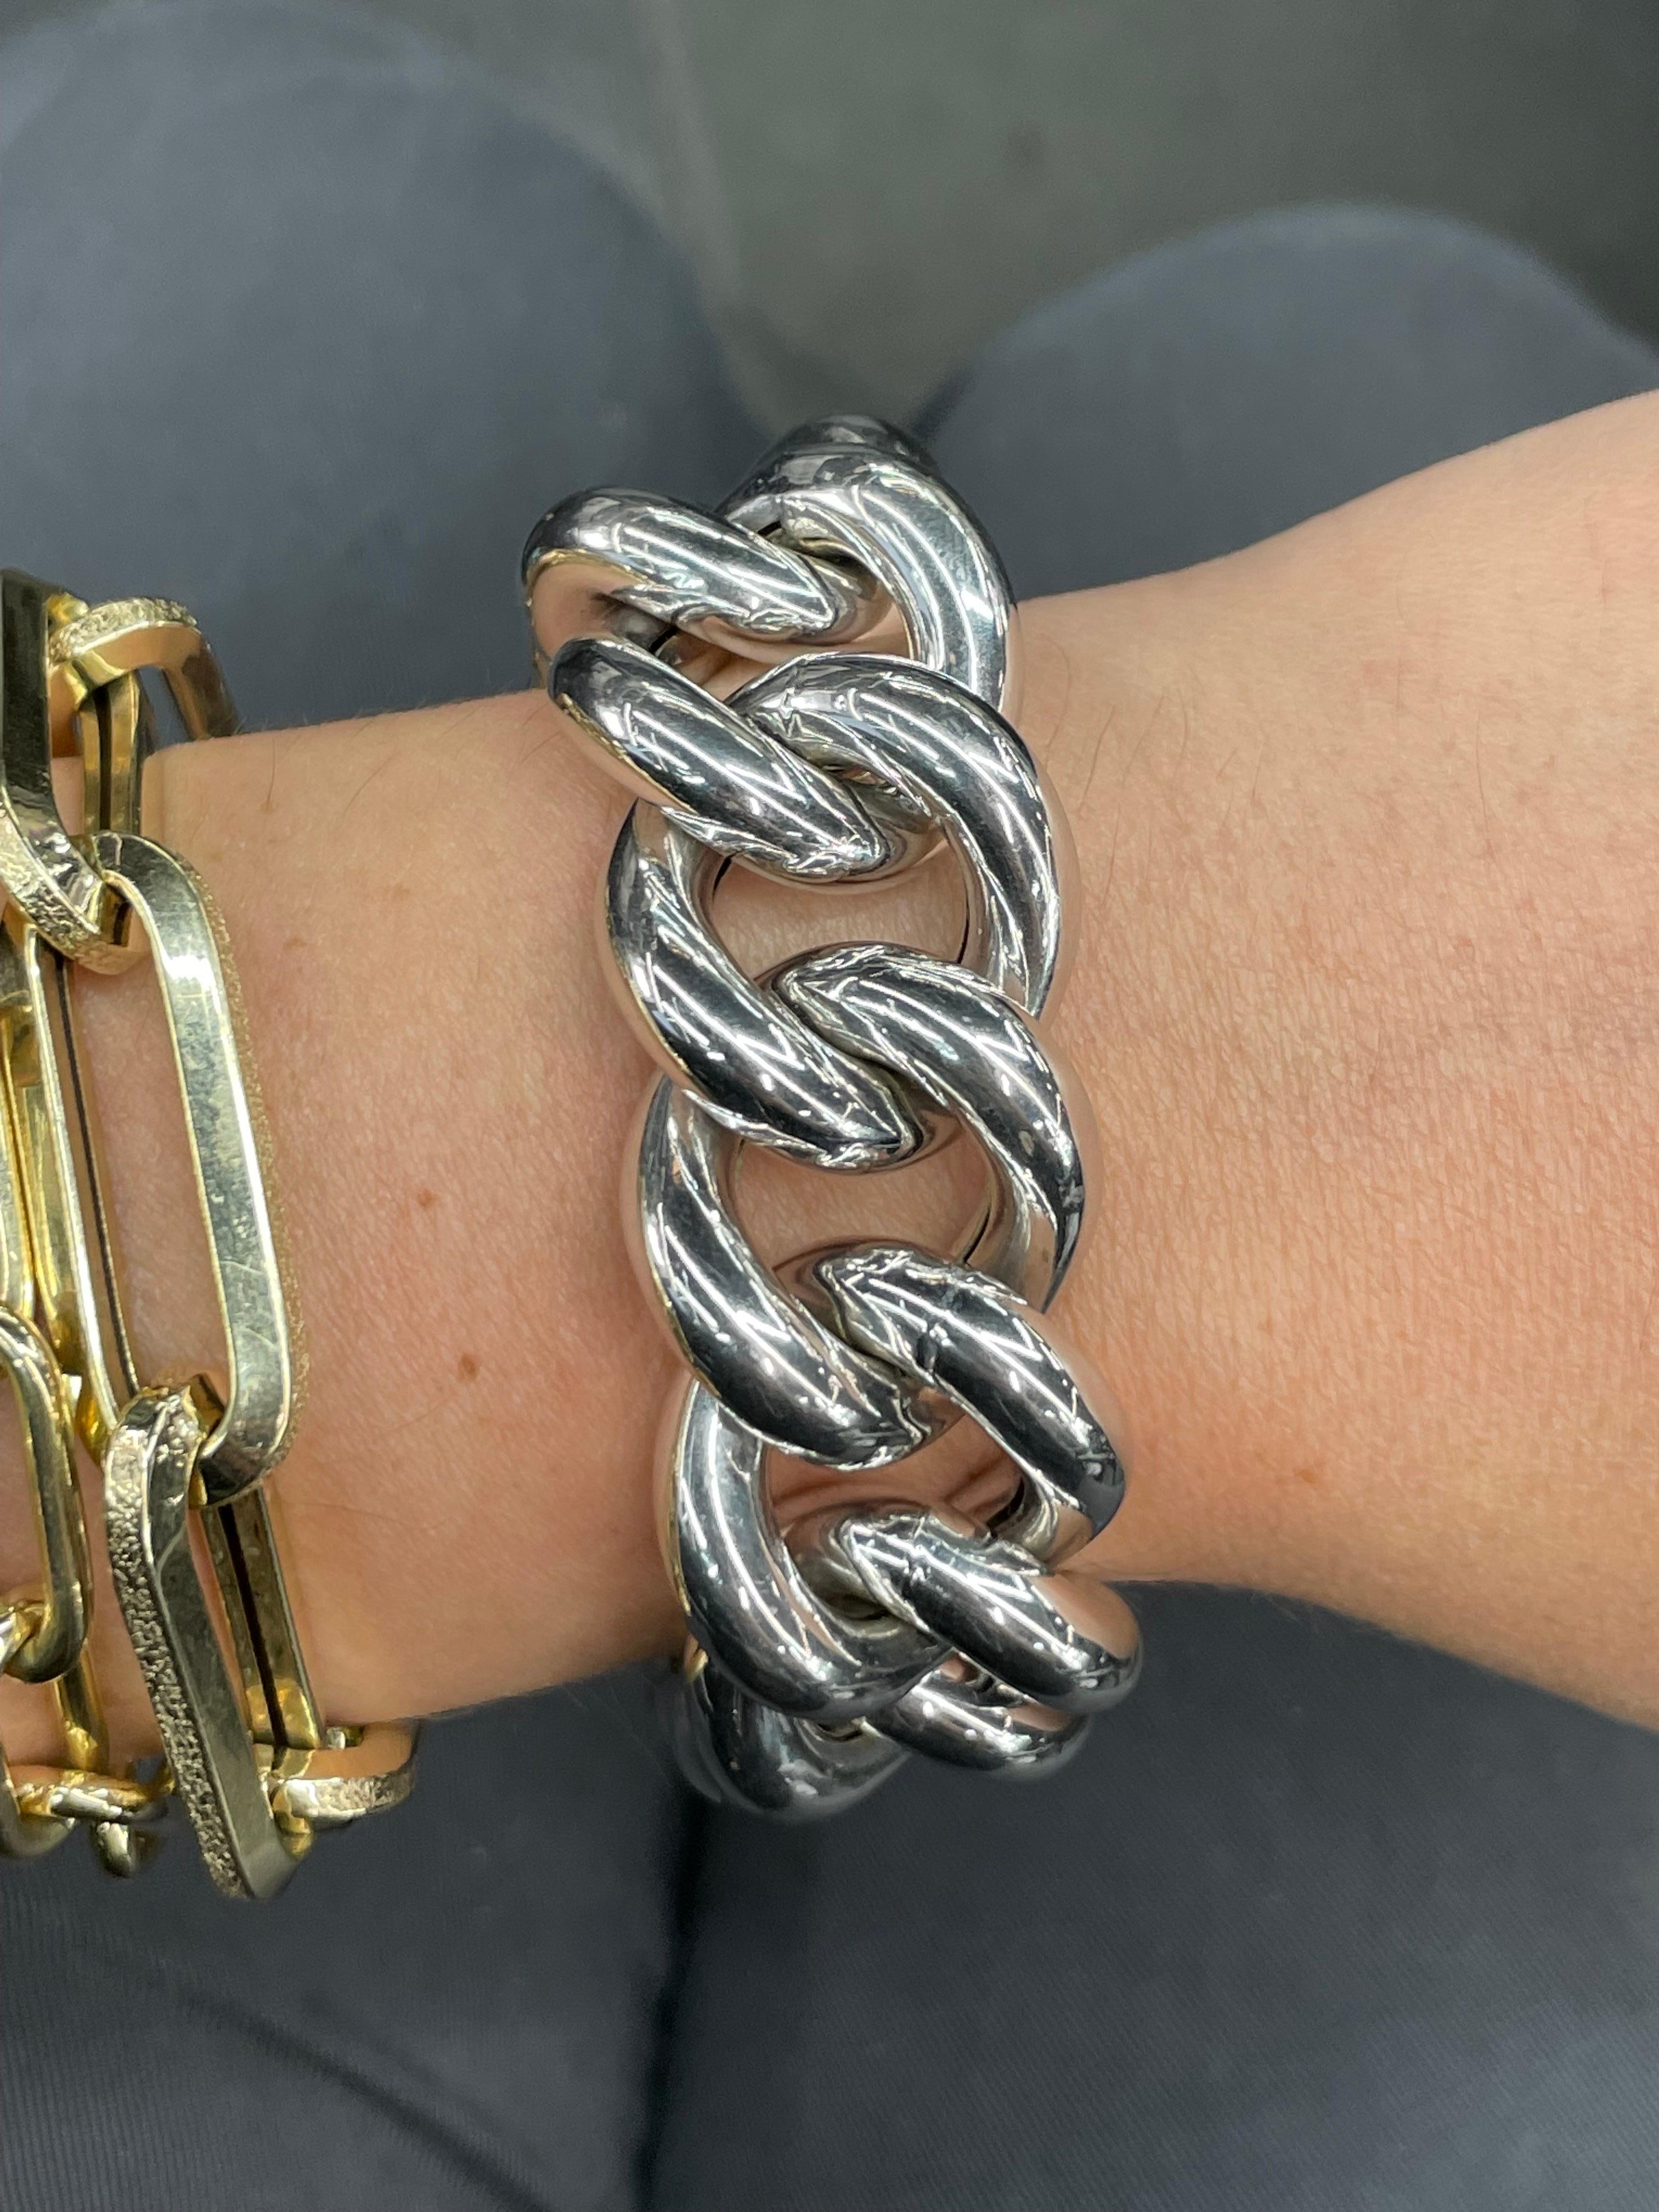 14 Karat White Gold bracelet featuring 15 Cuban links weighing 64.03 Grams, made in Italy. 
More Link Bracelets Available
DM For Pictures